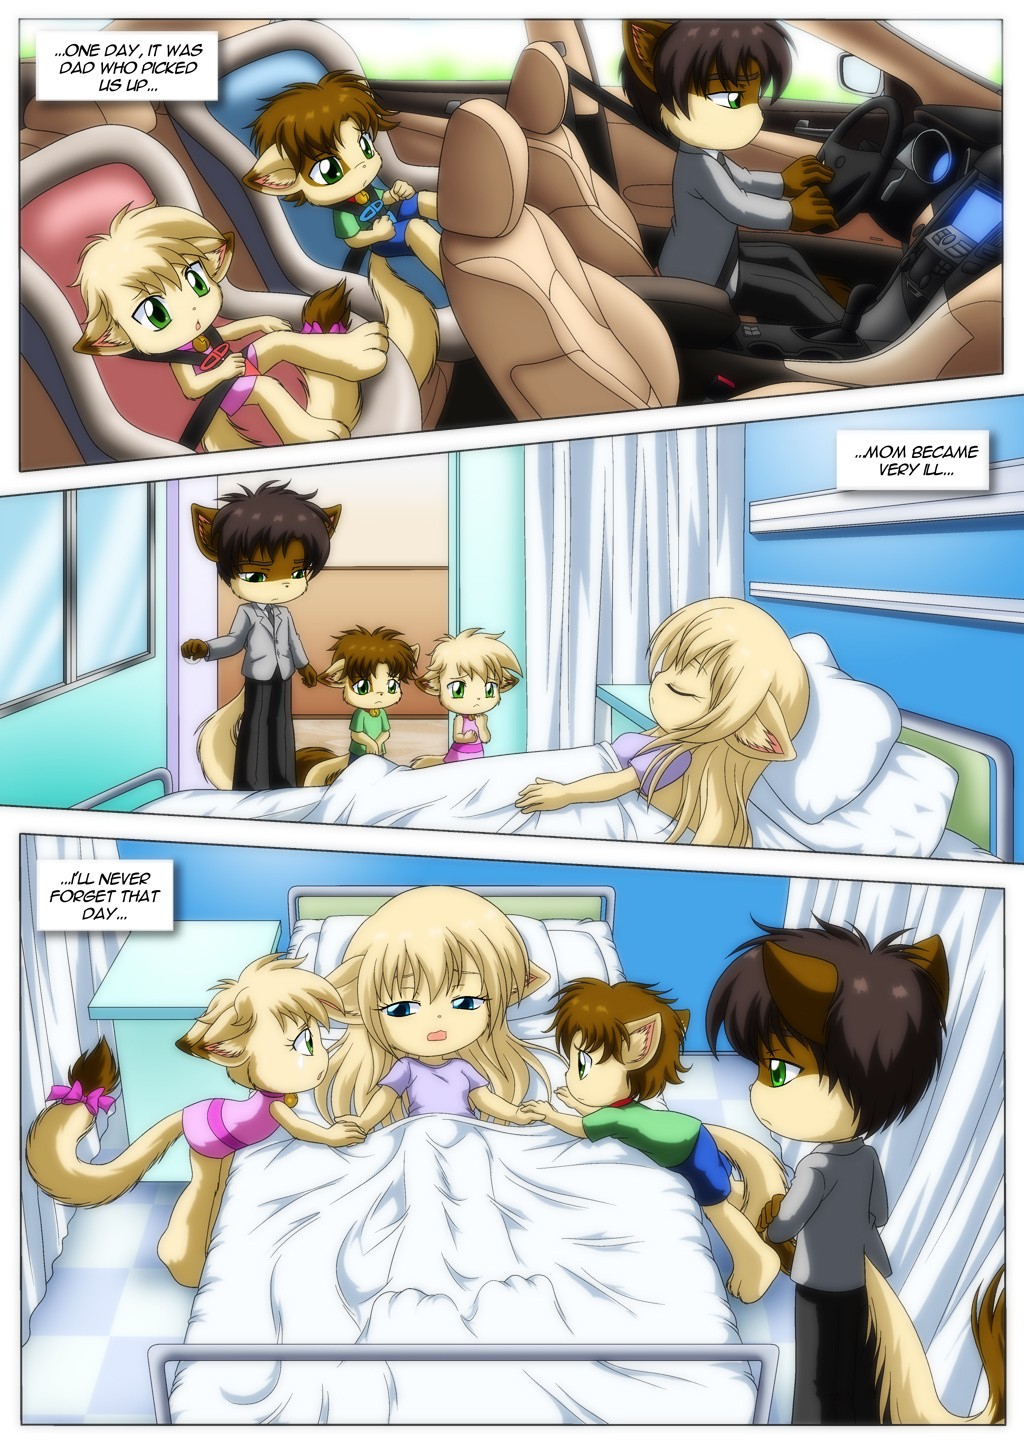 Little Tails 6: Missing The Light of The Day porn comic picture 18